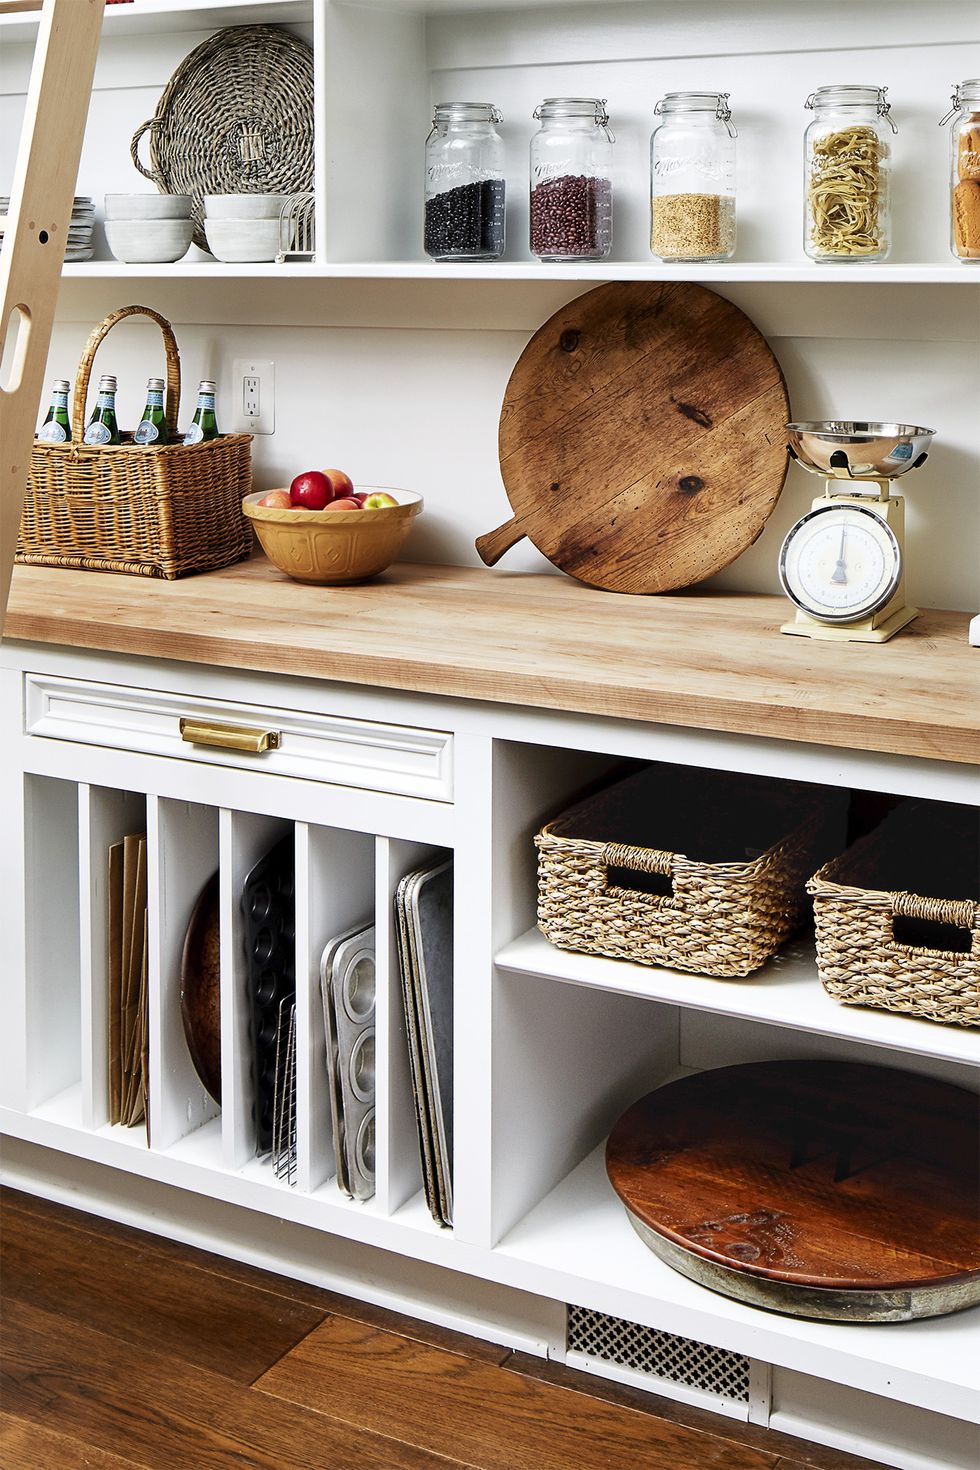 20 Ways To Organize Your Home With Organizing Baskets